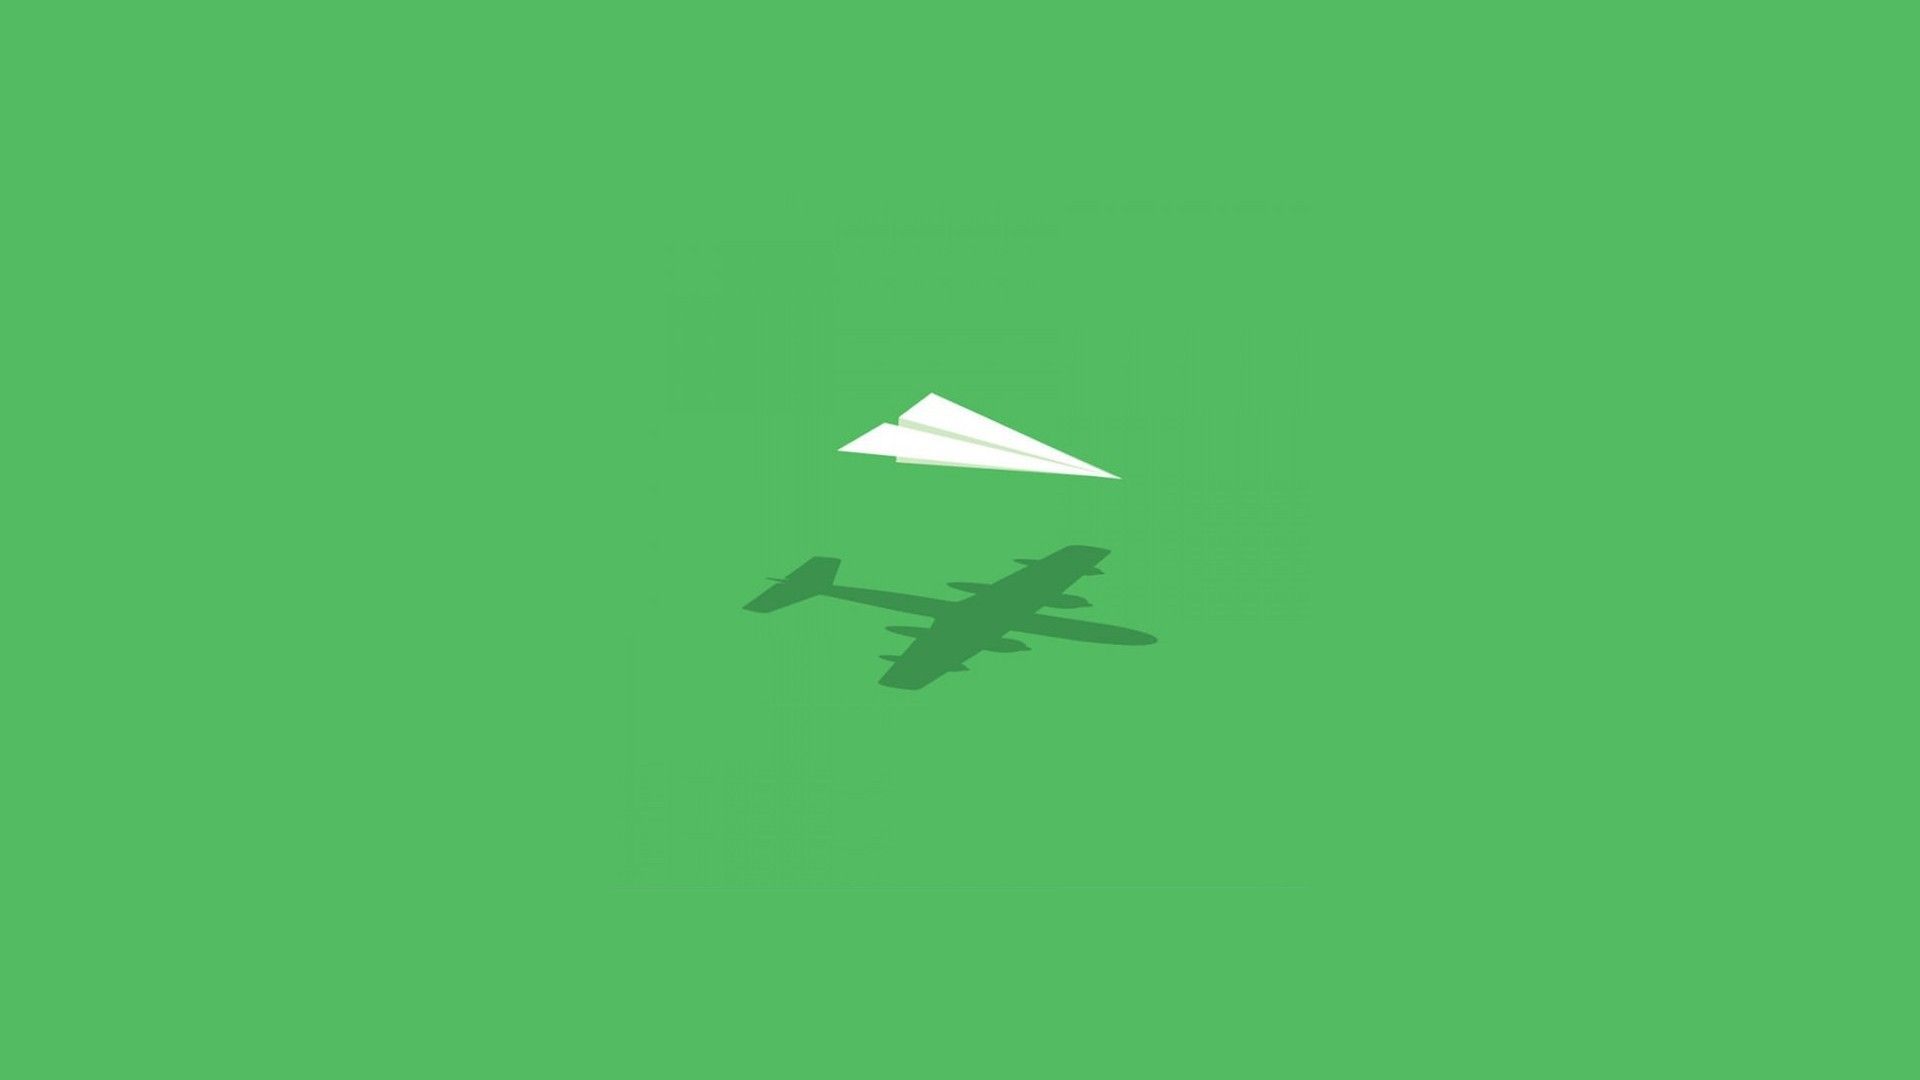 Paper Plane Minimalism, HD Artist, 4k Wallpaper, Image, Background, Photo and Picture